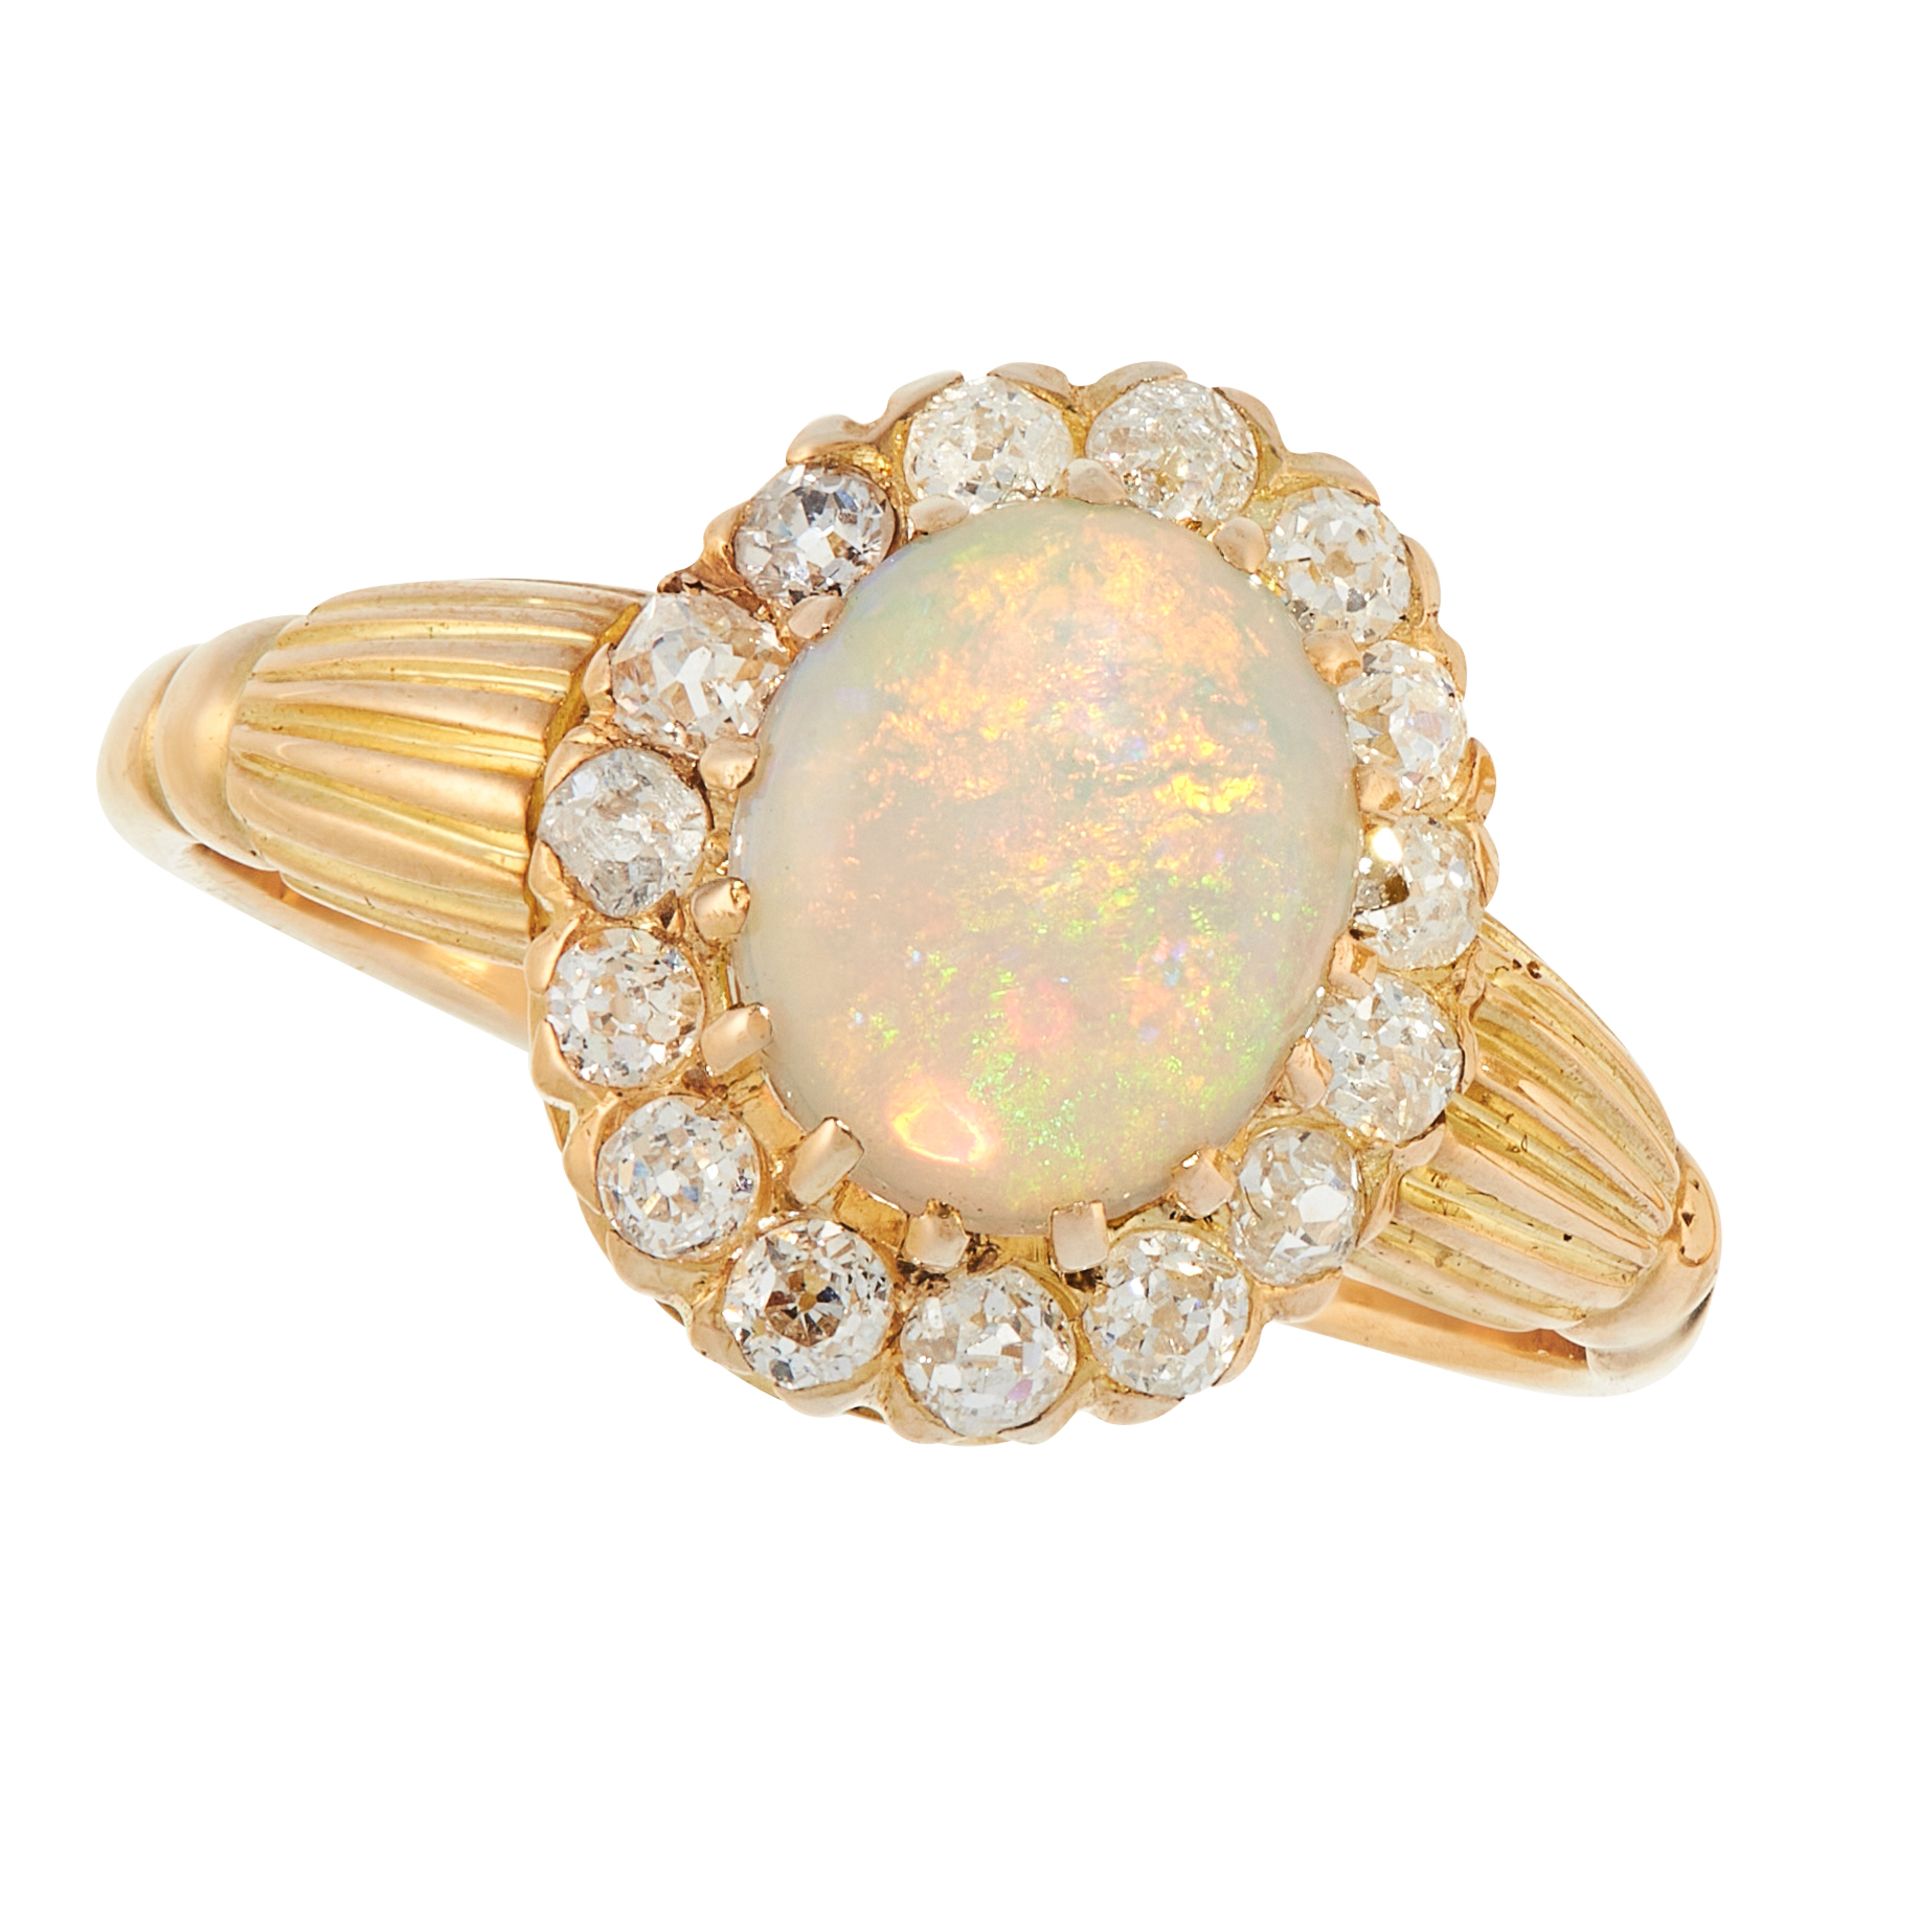 AN ANTIQUE OPAL AND DIAMOND DRESS RING in high carat yellow gold, set with an oval cabochon opal